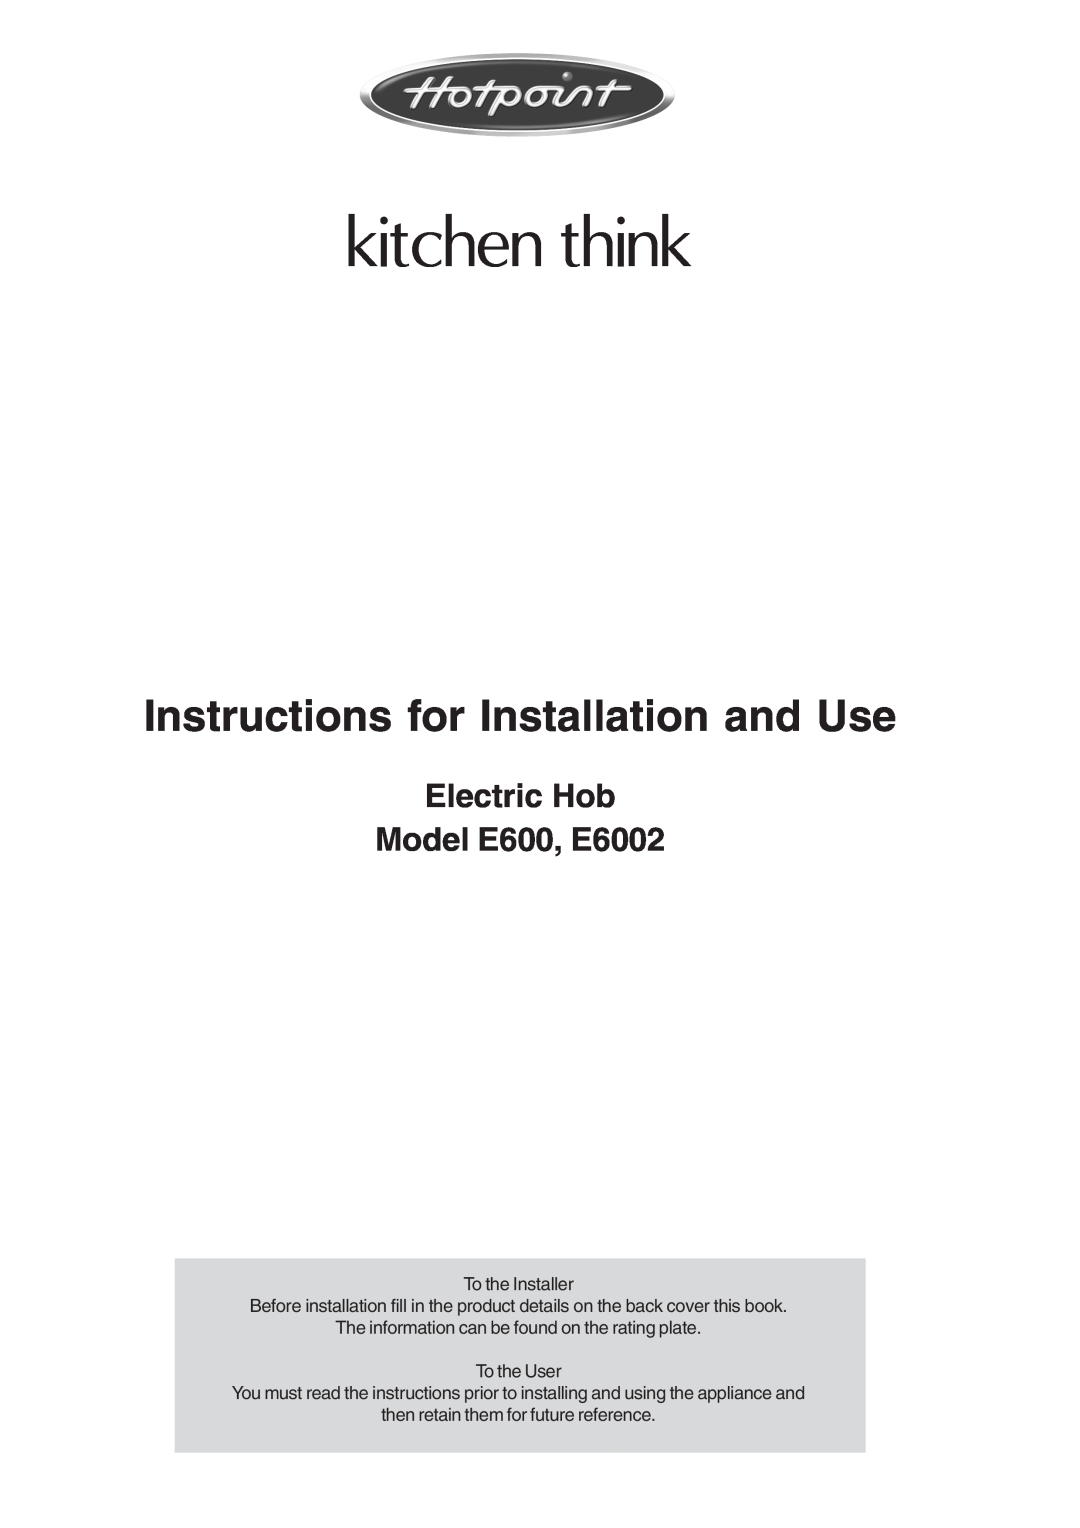 Hotpoint manual Electric Hob Model E600, E6002, kitchen think, Instructions for Installation and Use 